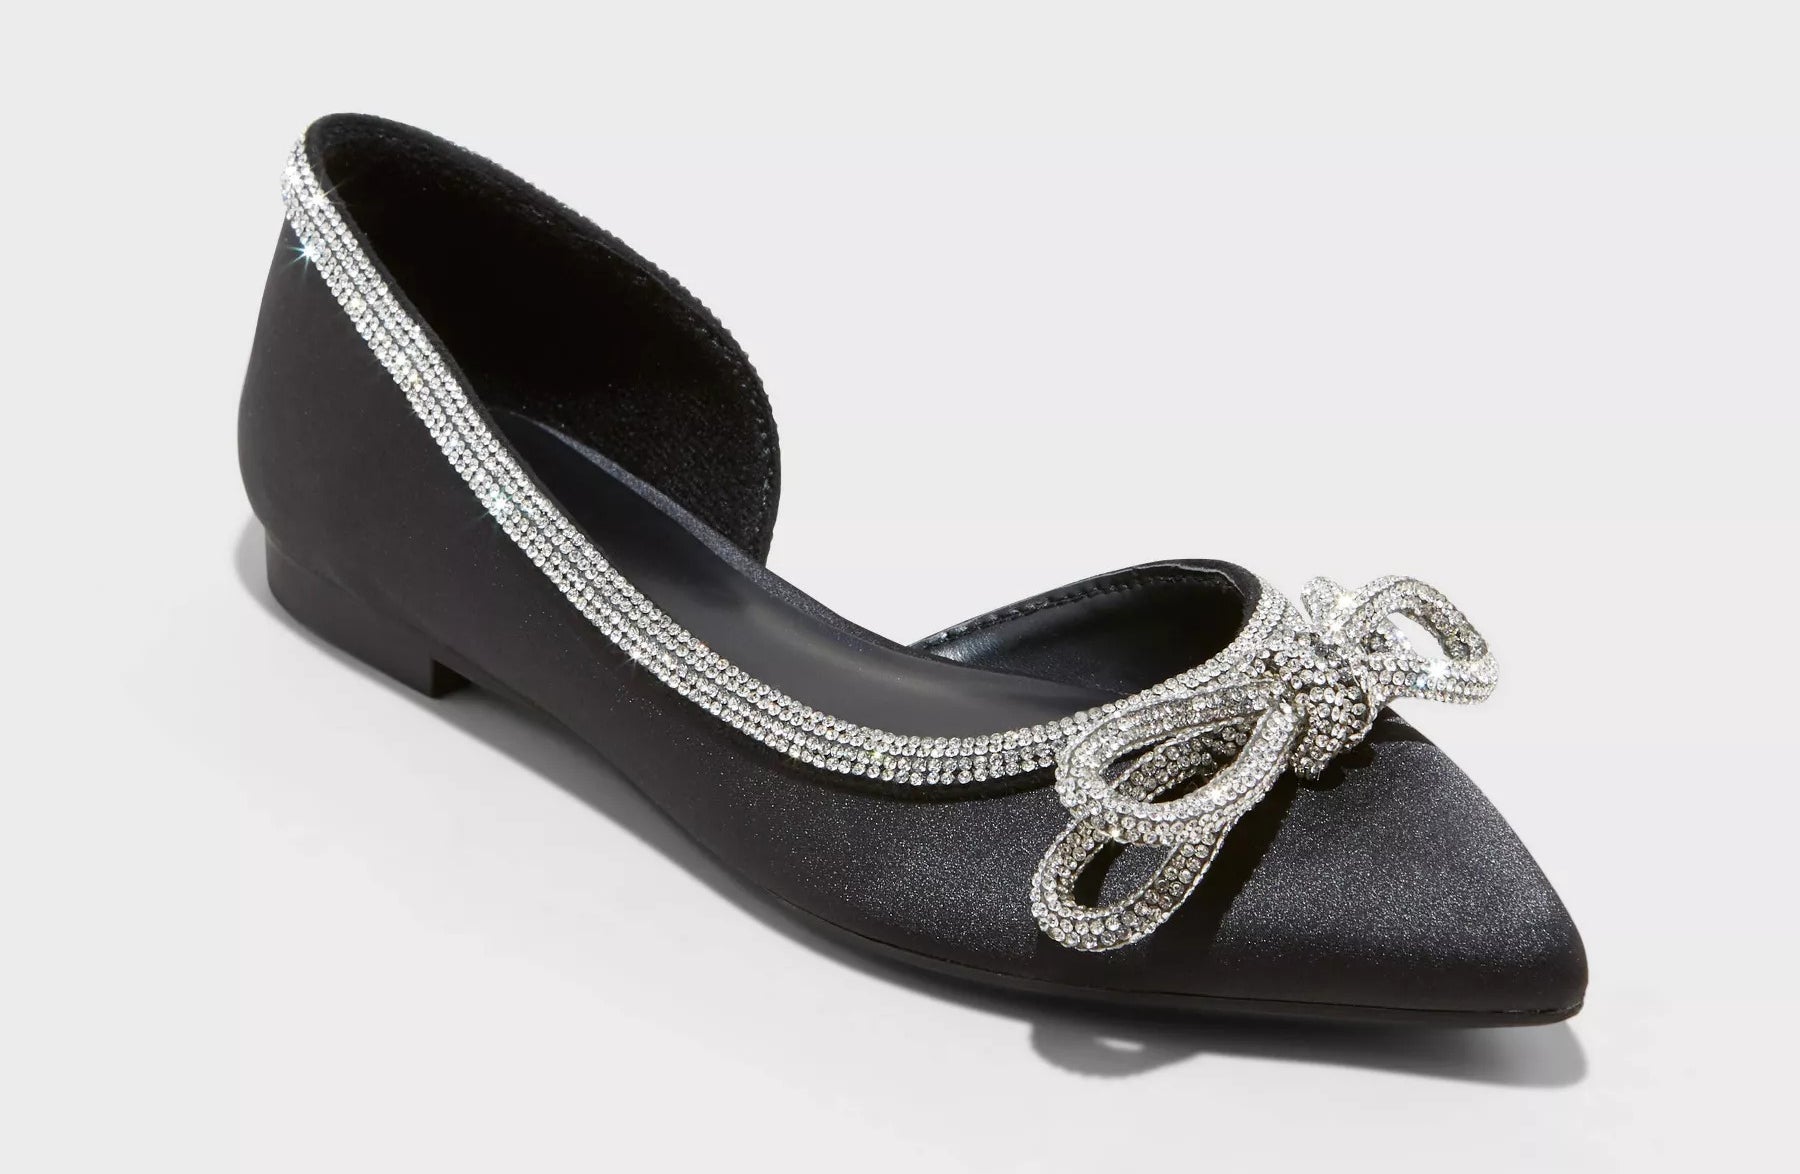 The pointed-toe satin flats, decorated with a knotted rhinestone bow and trim